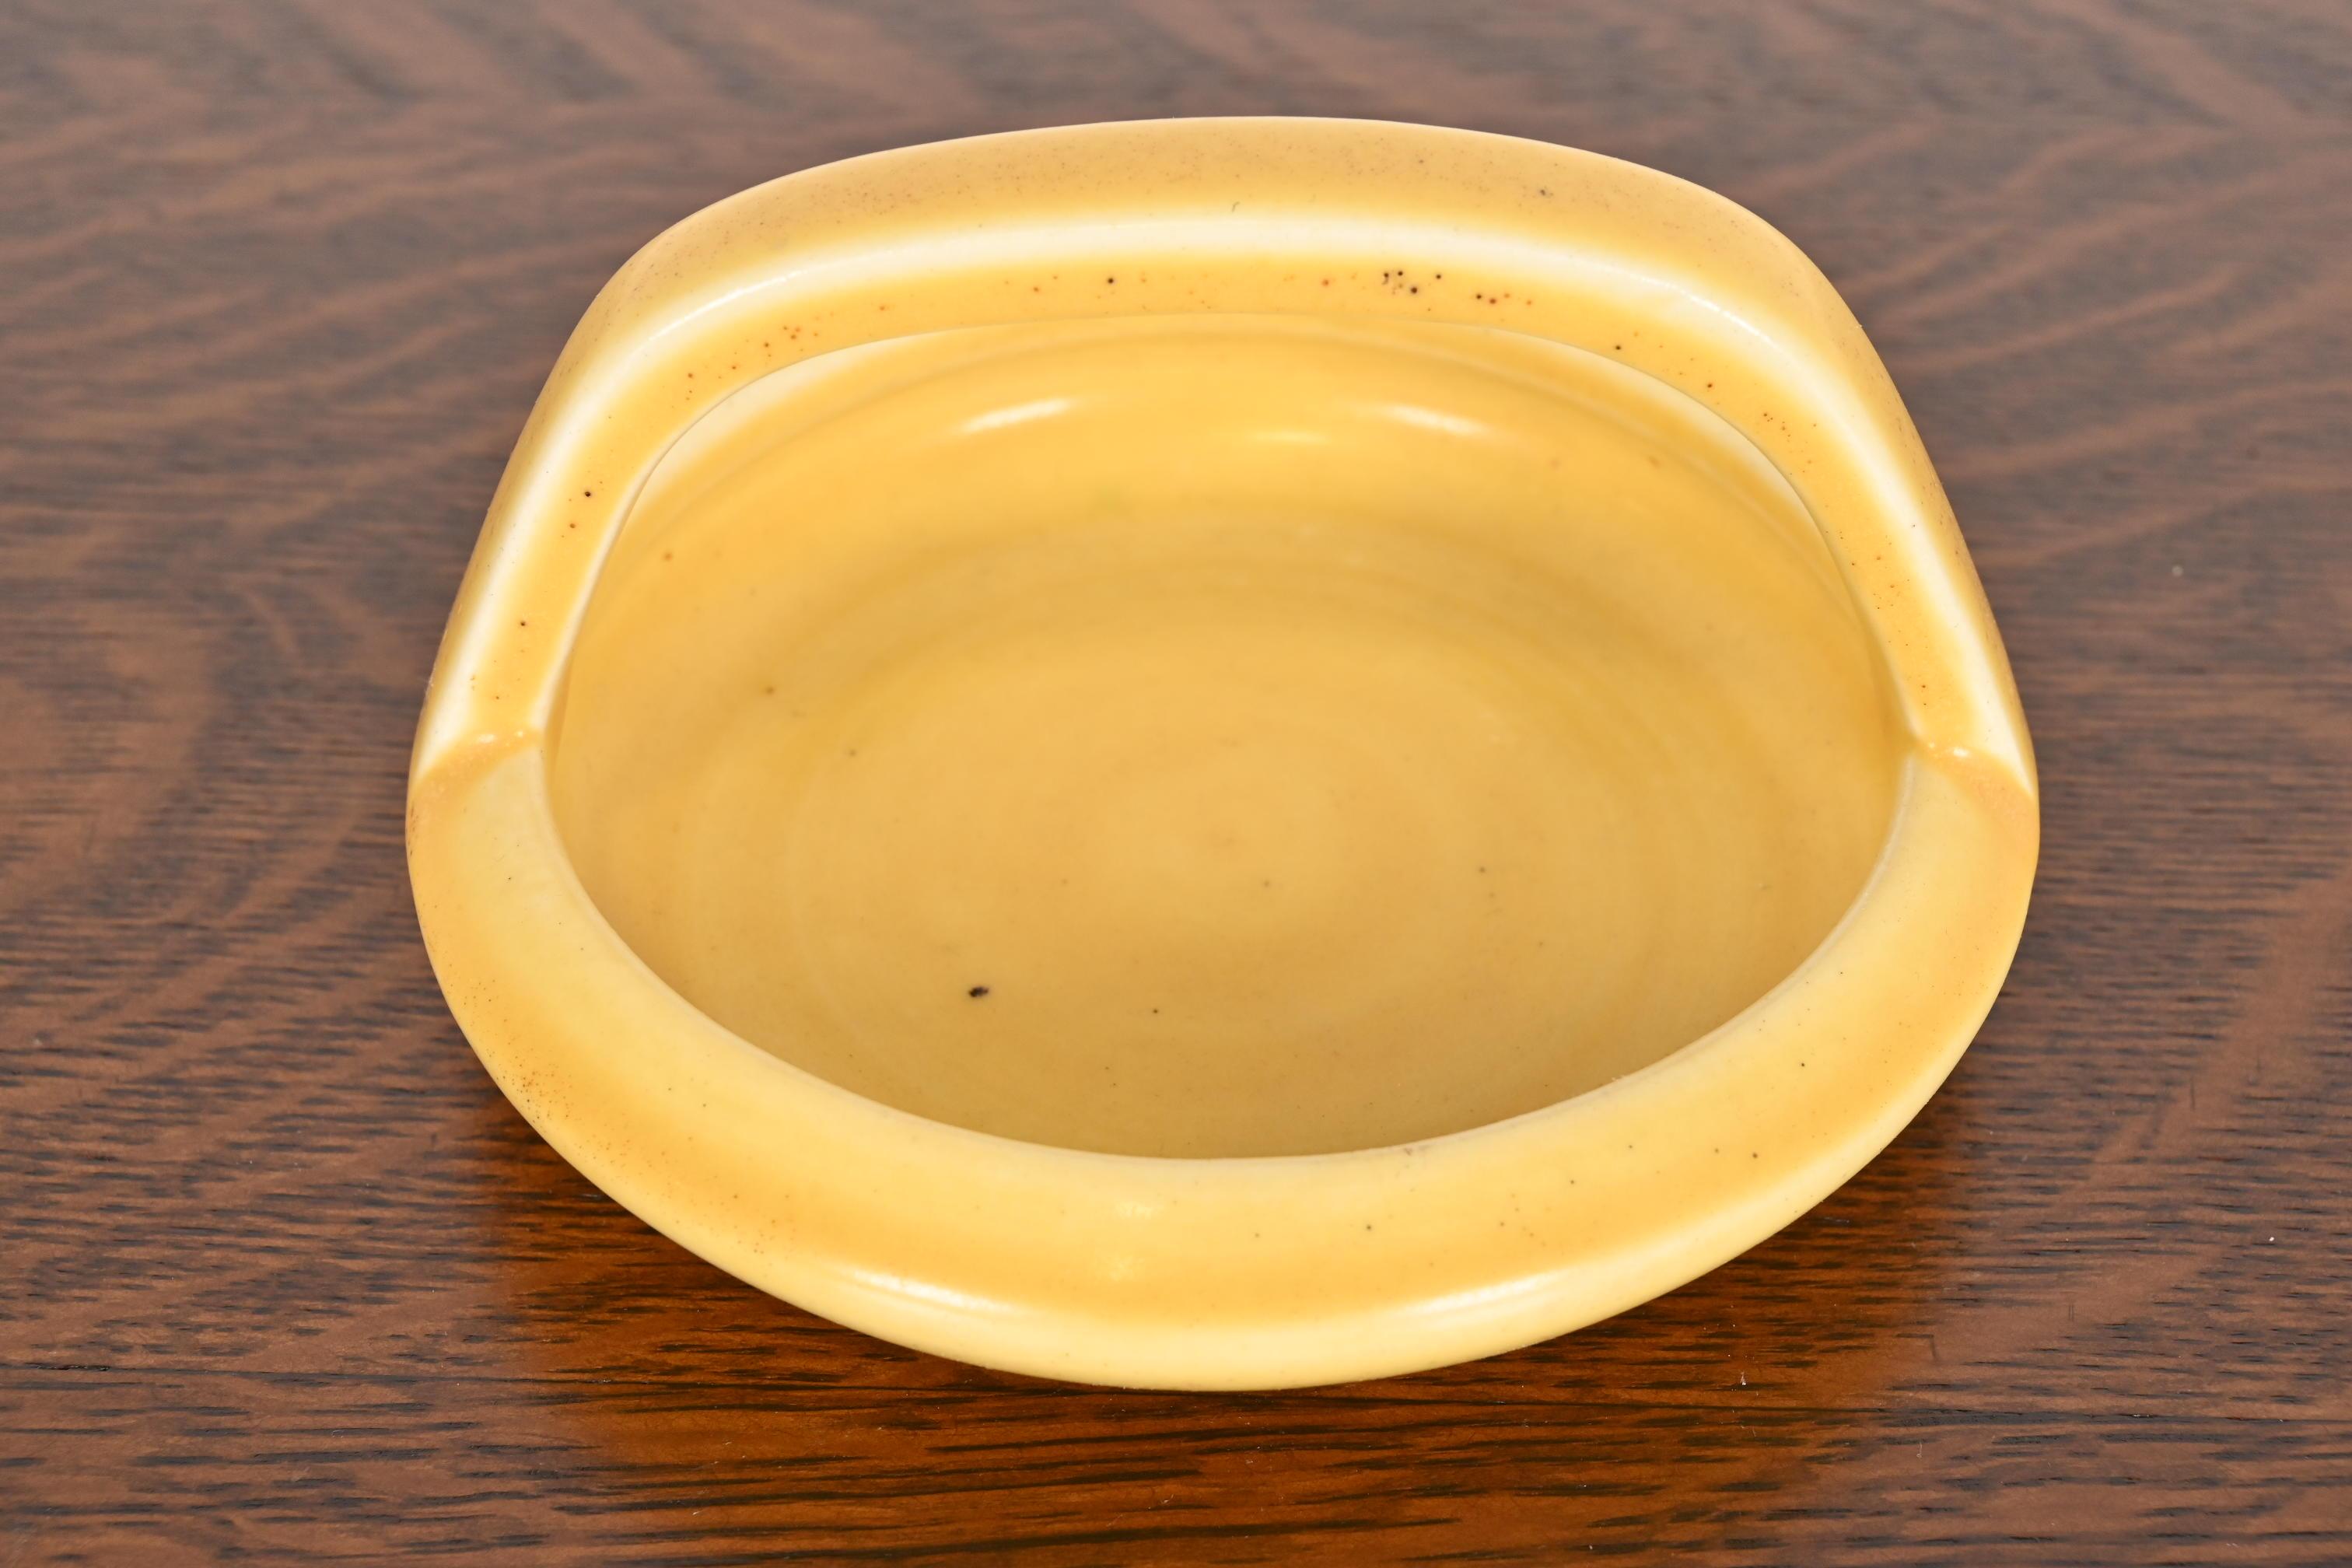 A gorgeous Arts & Crafts period glazed ceramic art pottery handled bowl, catchall, or ashtray

By Rookwood Pottery

USA, 1922

Glazed ceramic, in a beautiful yellow color.

Measures: 5.63